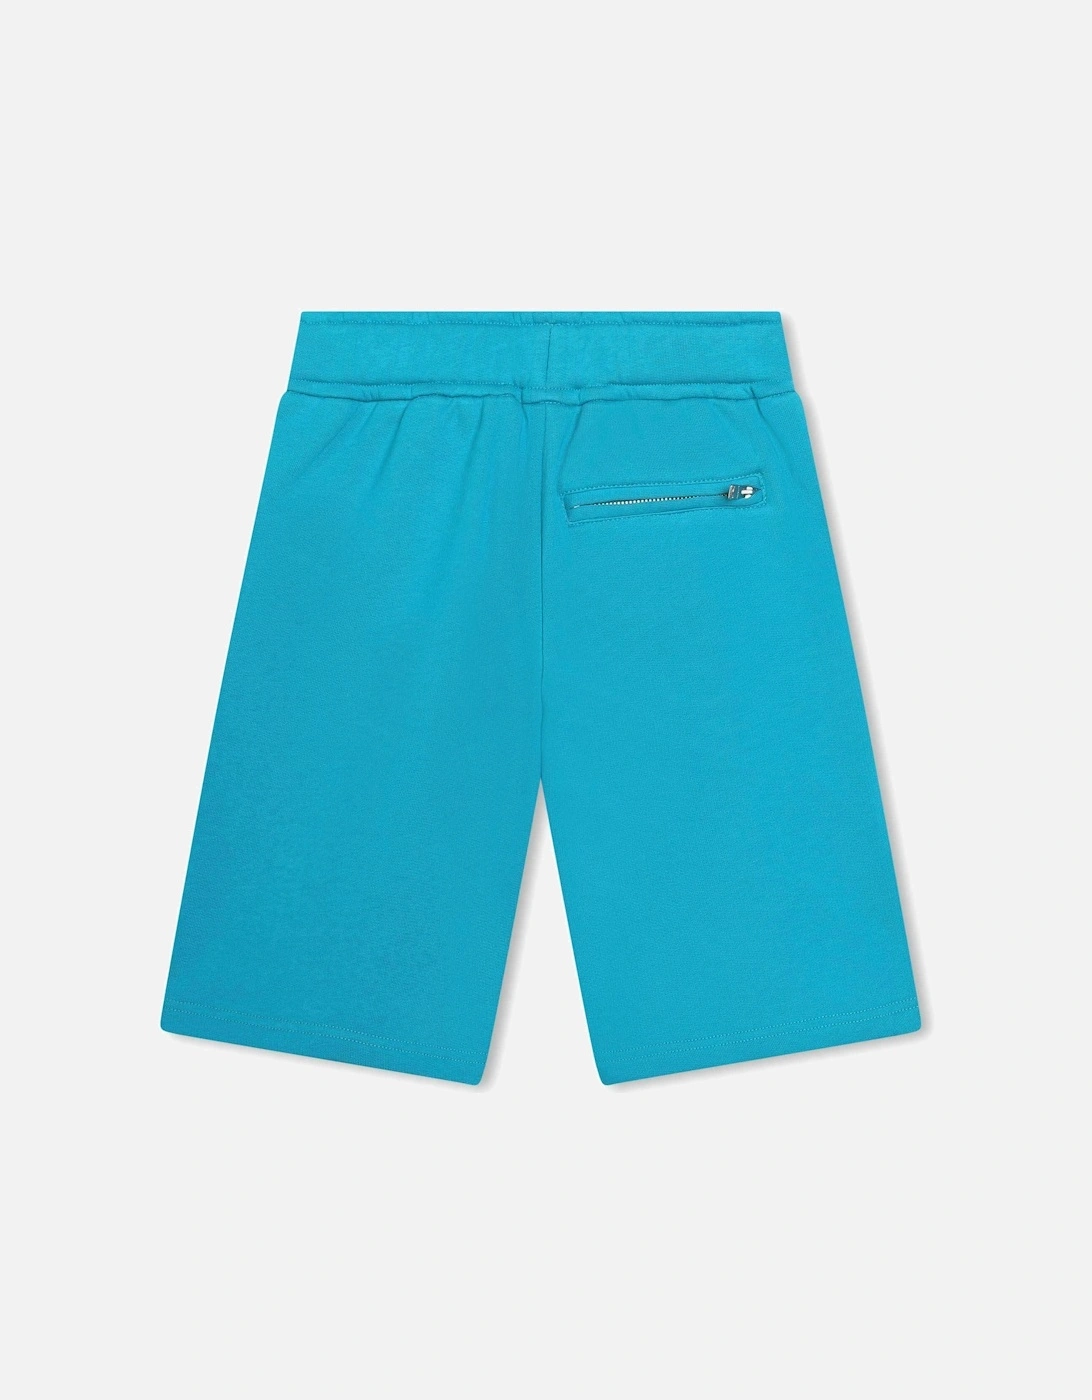 Boys Turquoise Curb Shorts